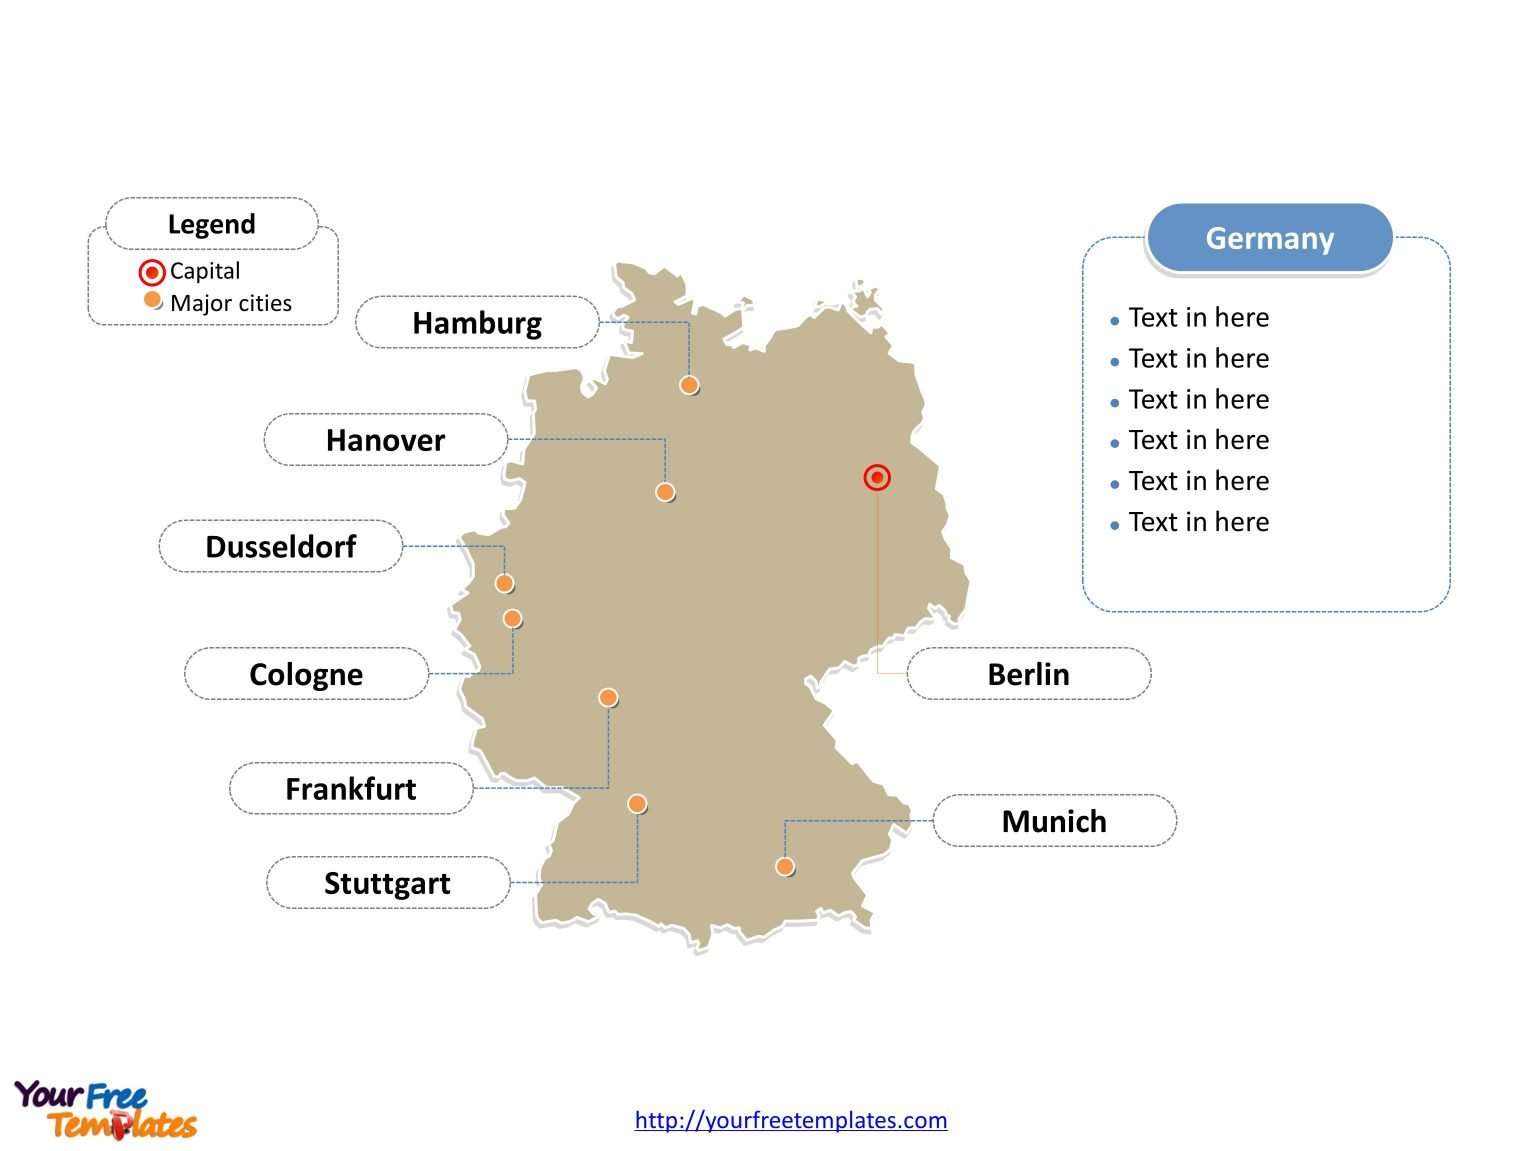 Germany PowerPoint map label with cities